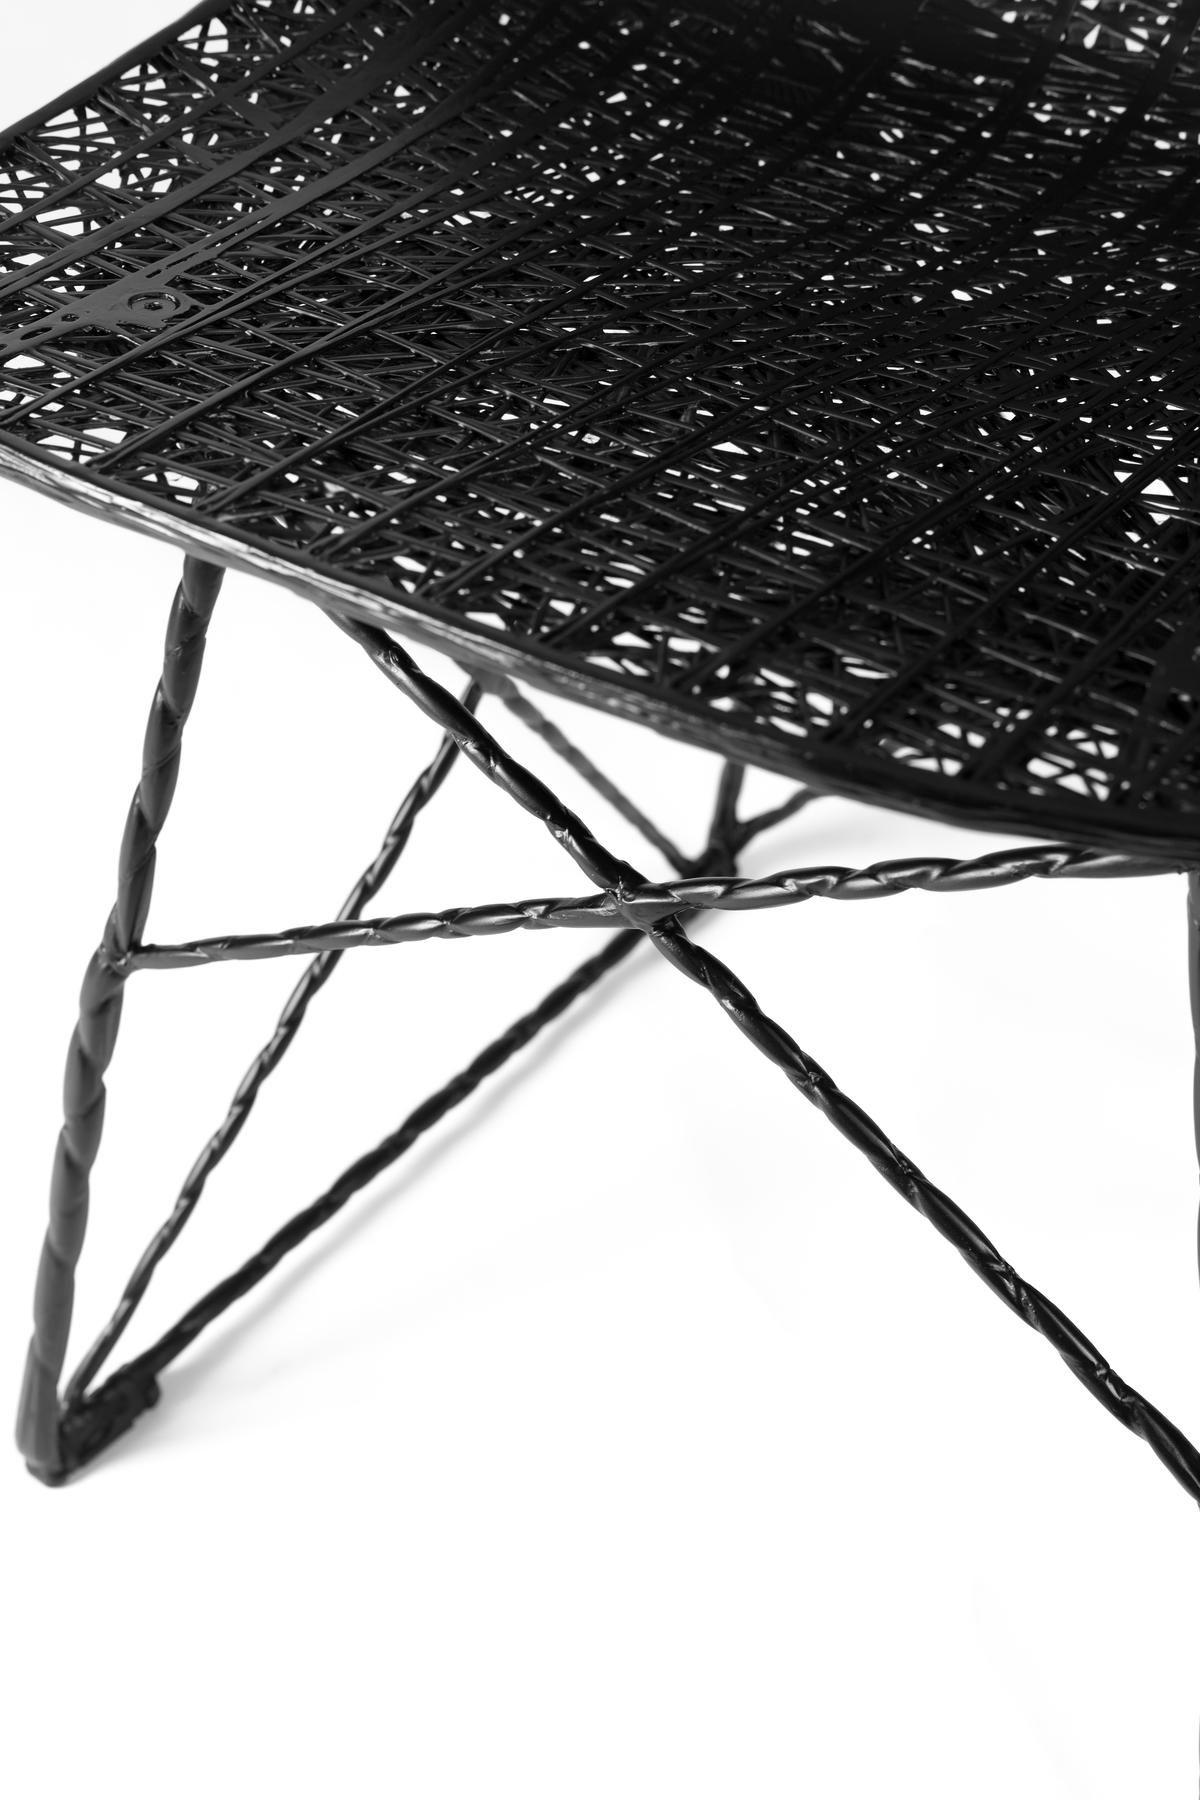 Moooi Carbon Chair in Black Fiber with Epoxy Resin by Bertjan Pot For Sale 4